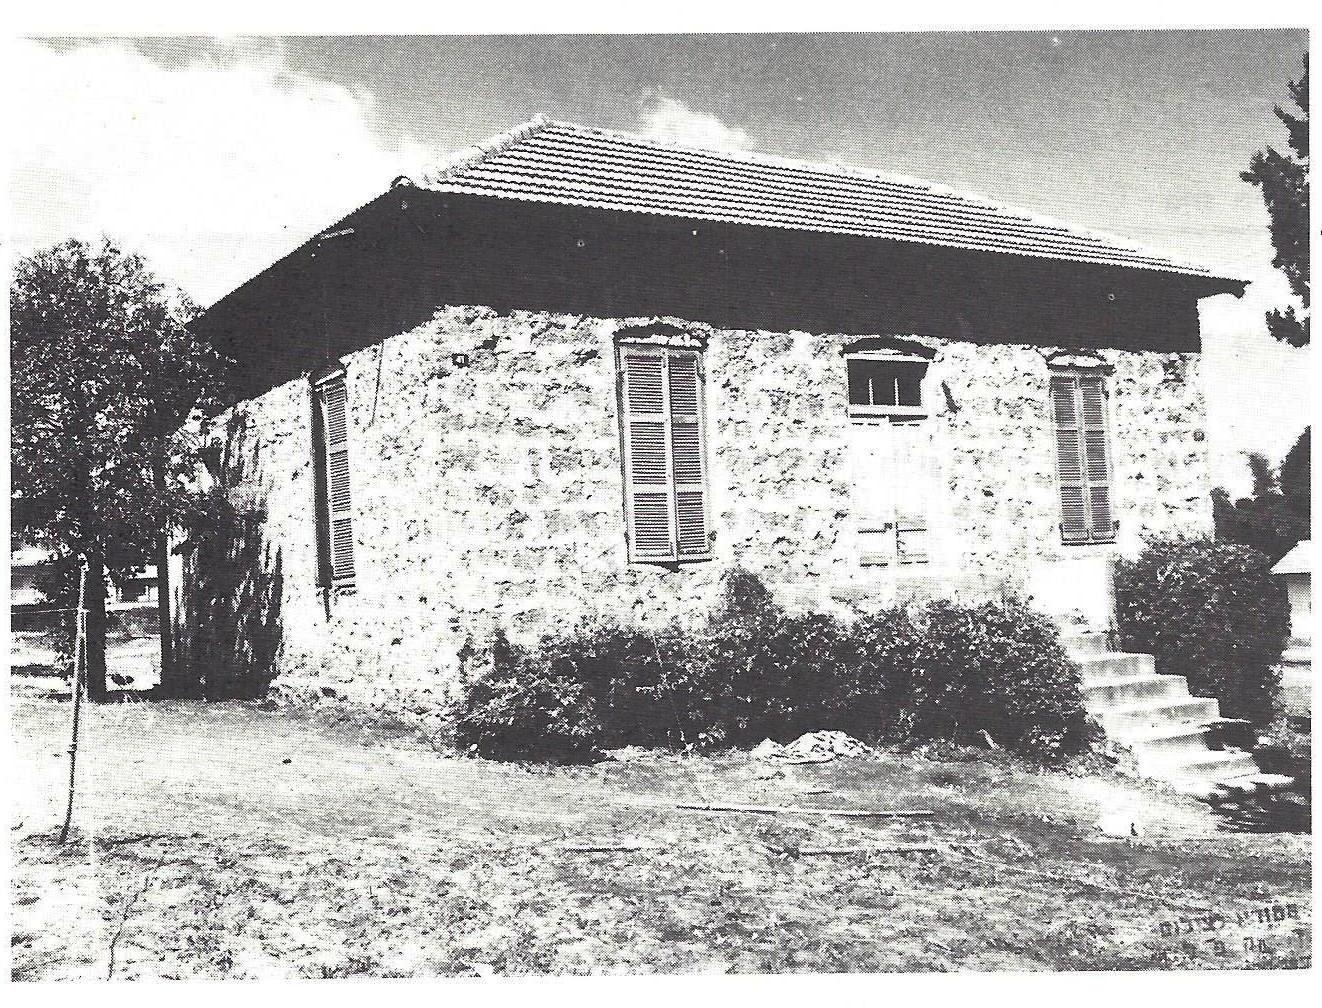 First public library in Kfar Sava, the house of Nathan Rapaport